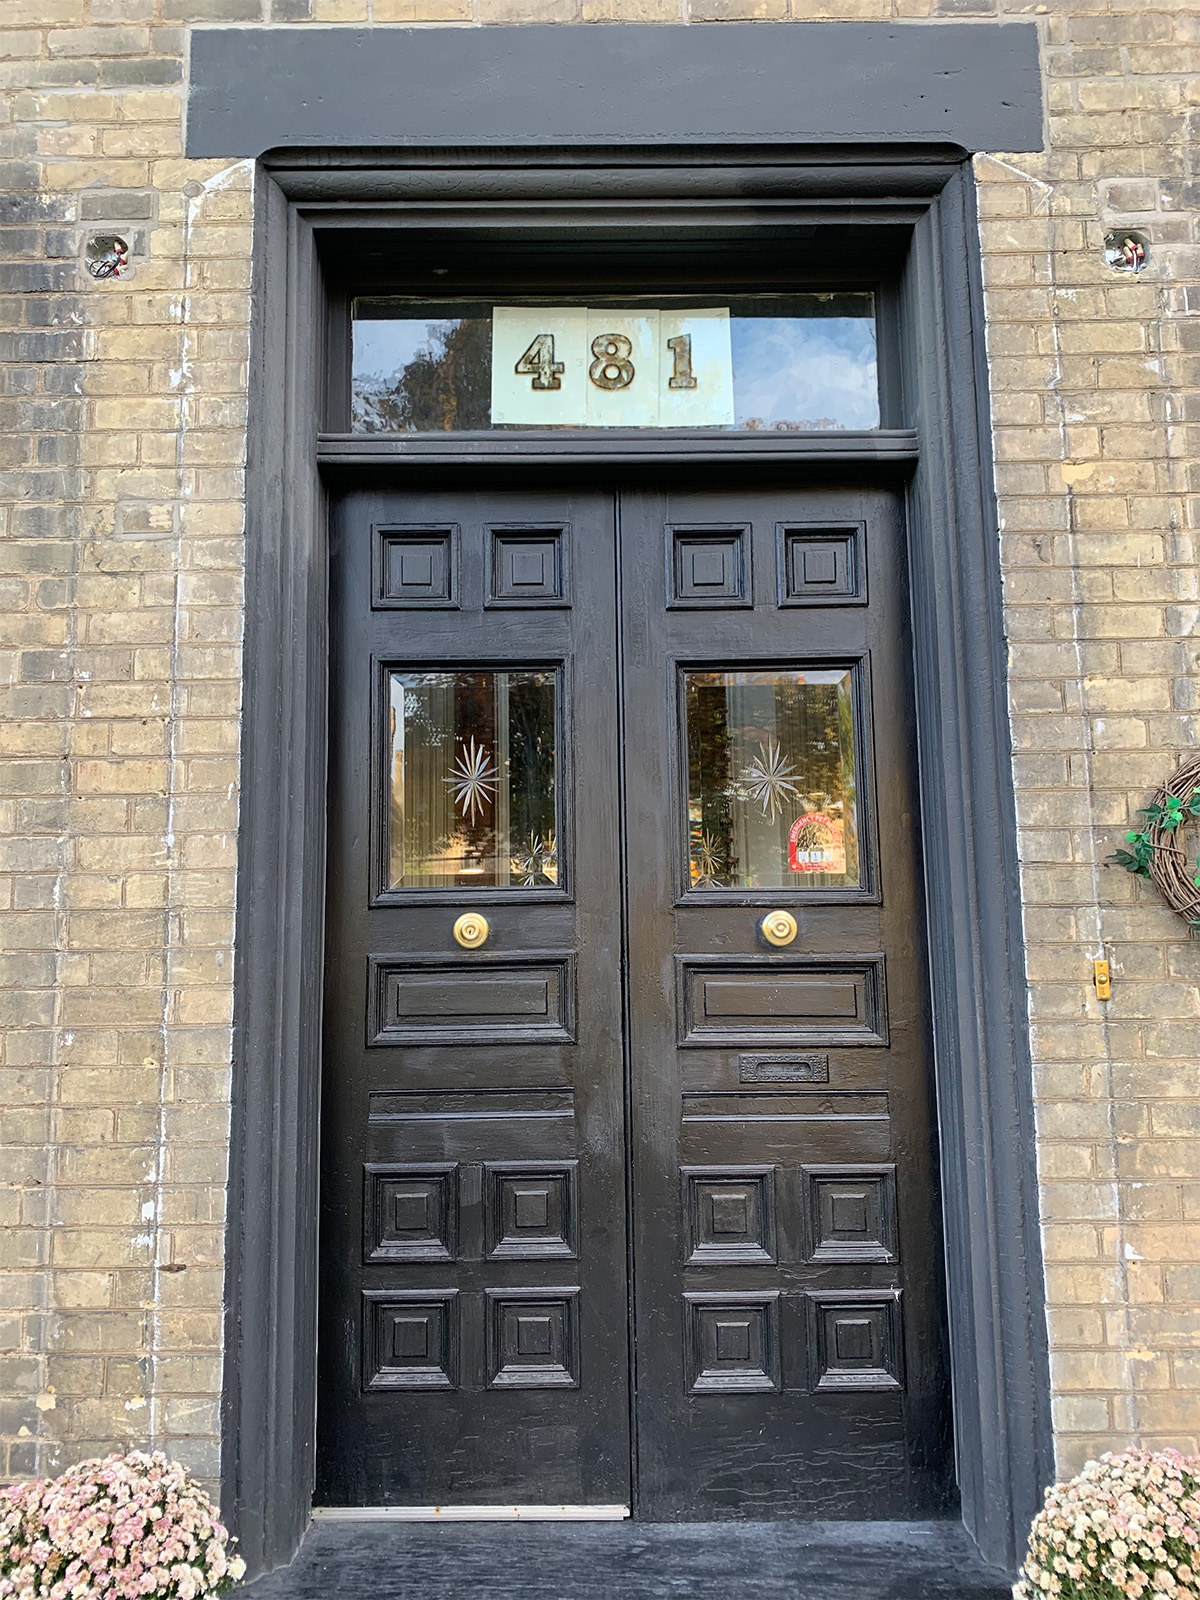 Black Painted Victorian Home Entry With Doors & Window